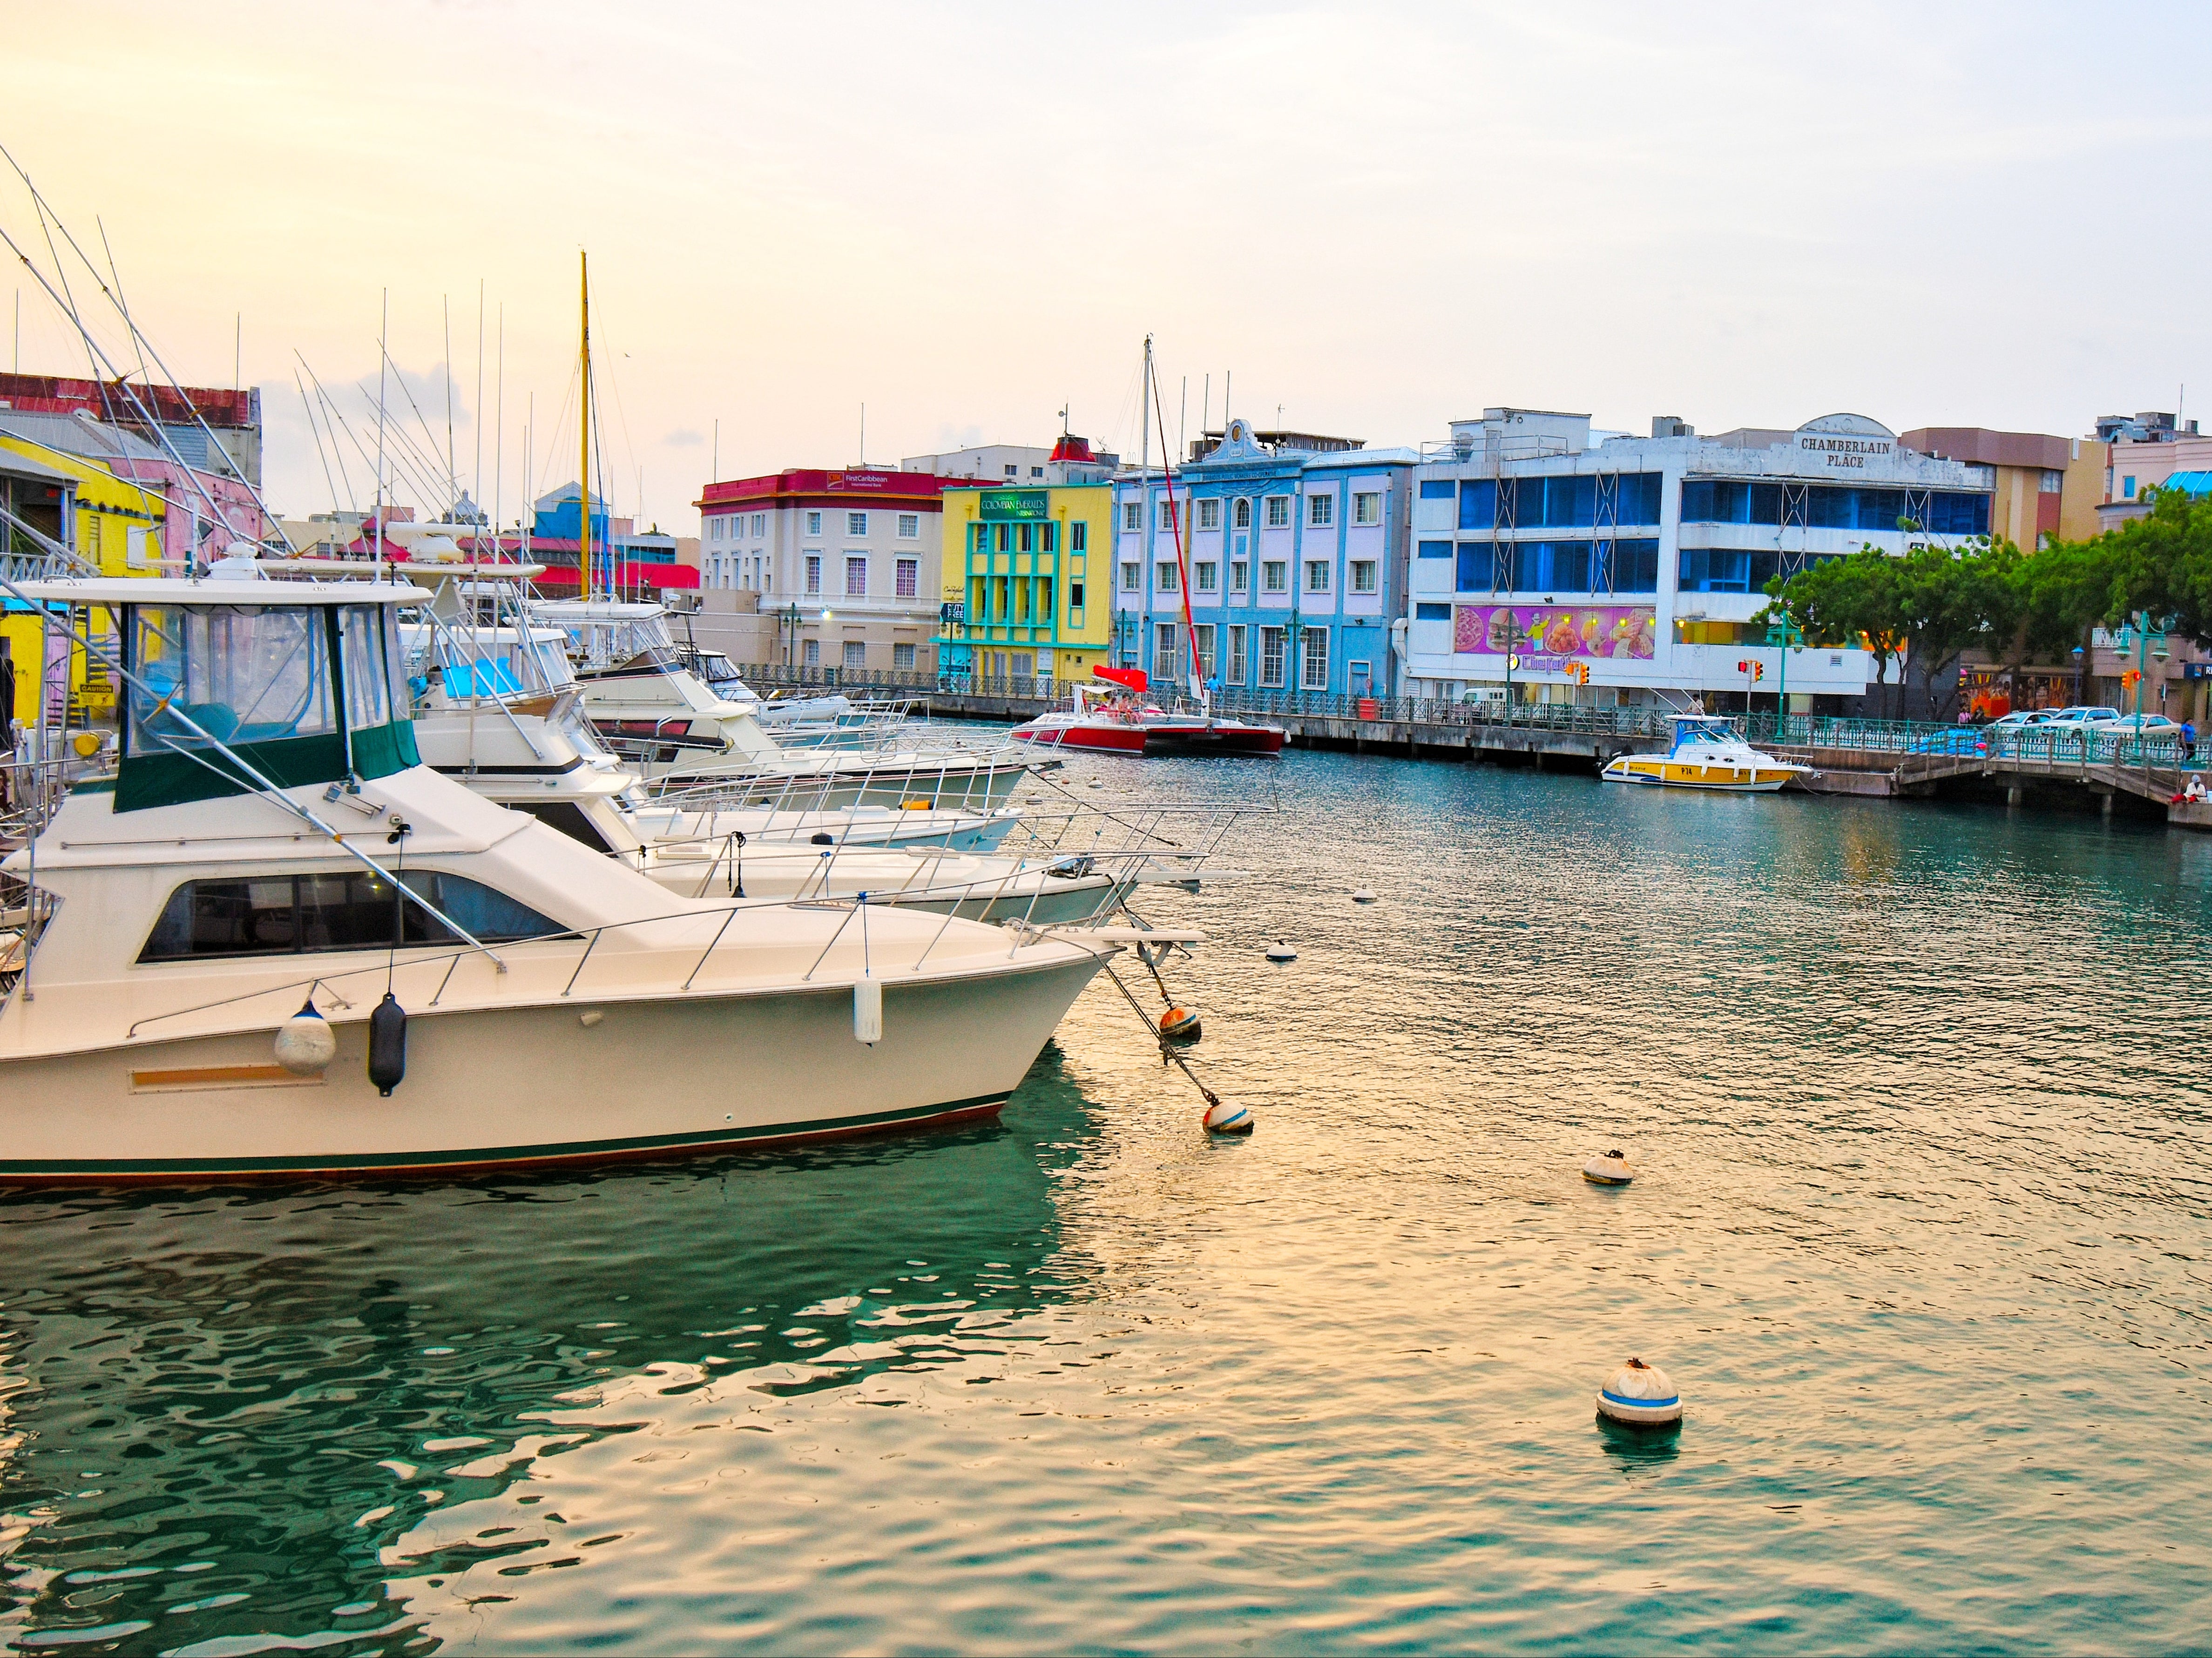 Bridgetown has an inner harbour, synagogue, museum and colonial architecture